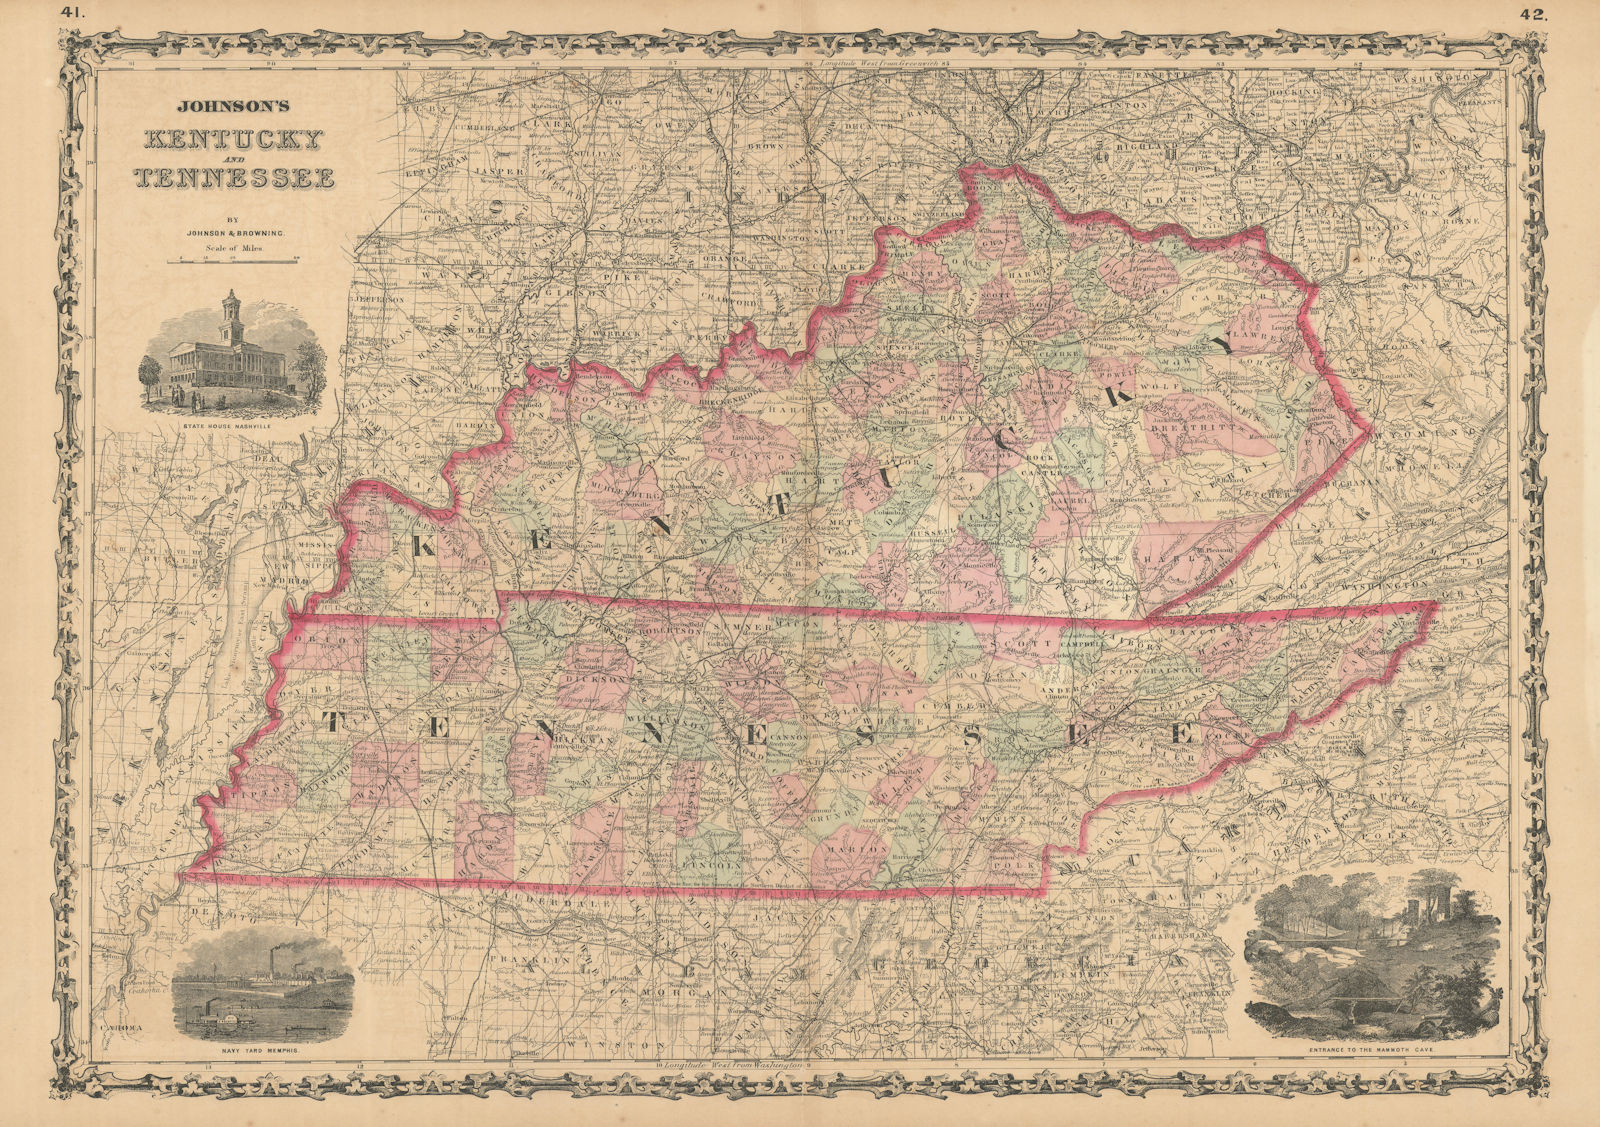 Associate Product Johnson's Kentucky and Tennessee. US state map showing counties 1861 old